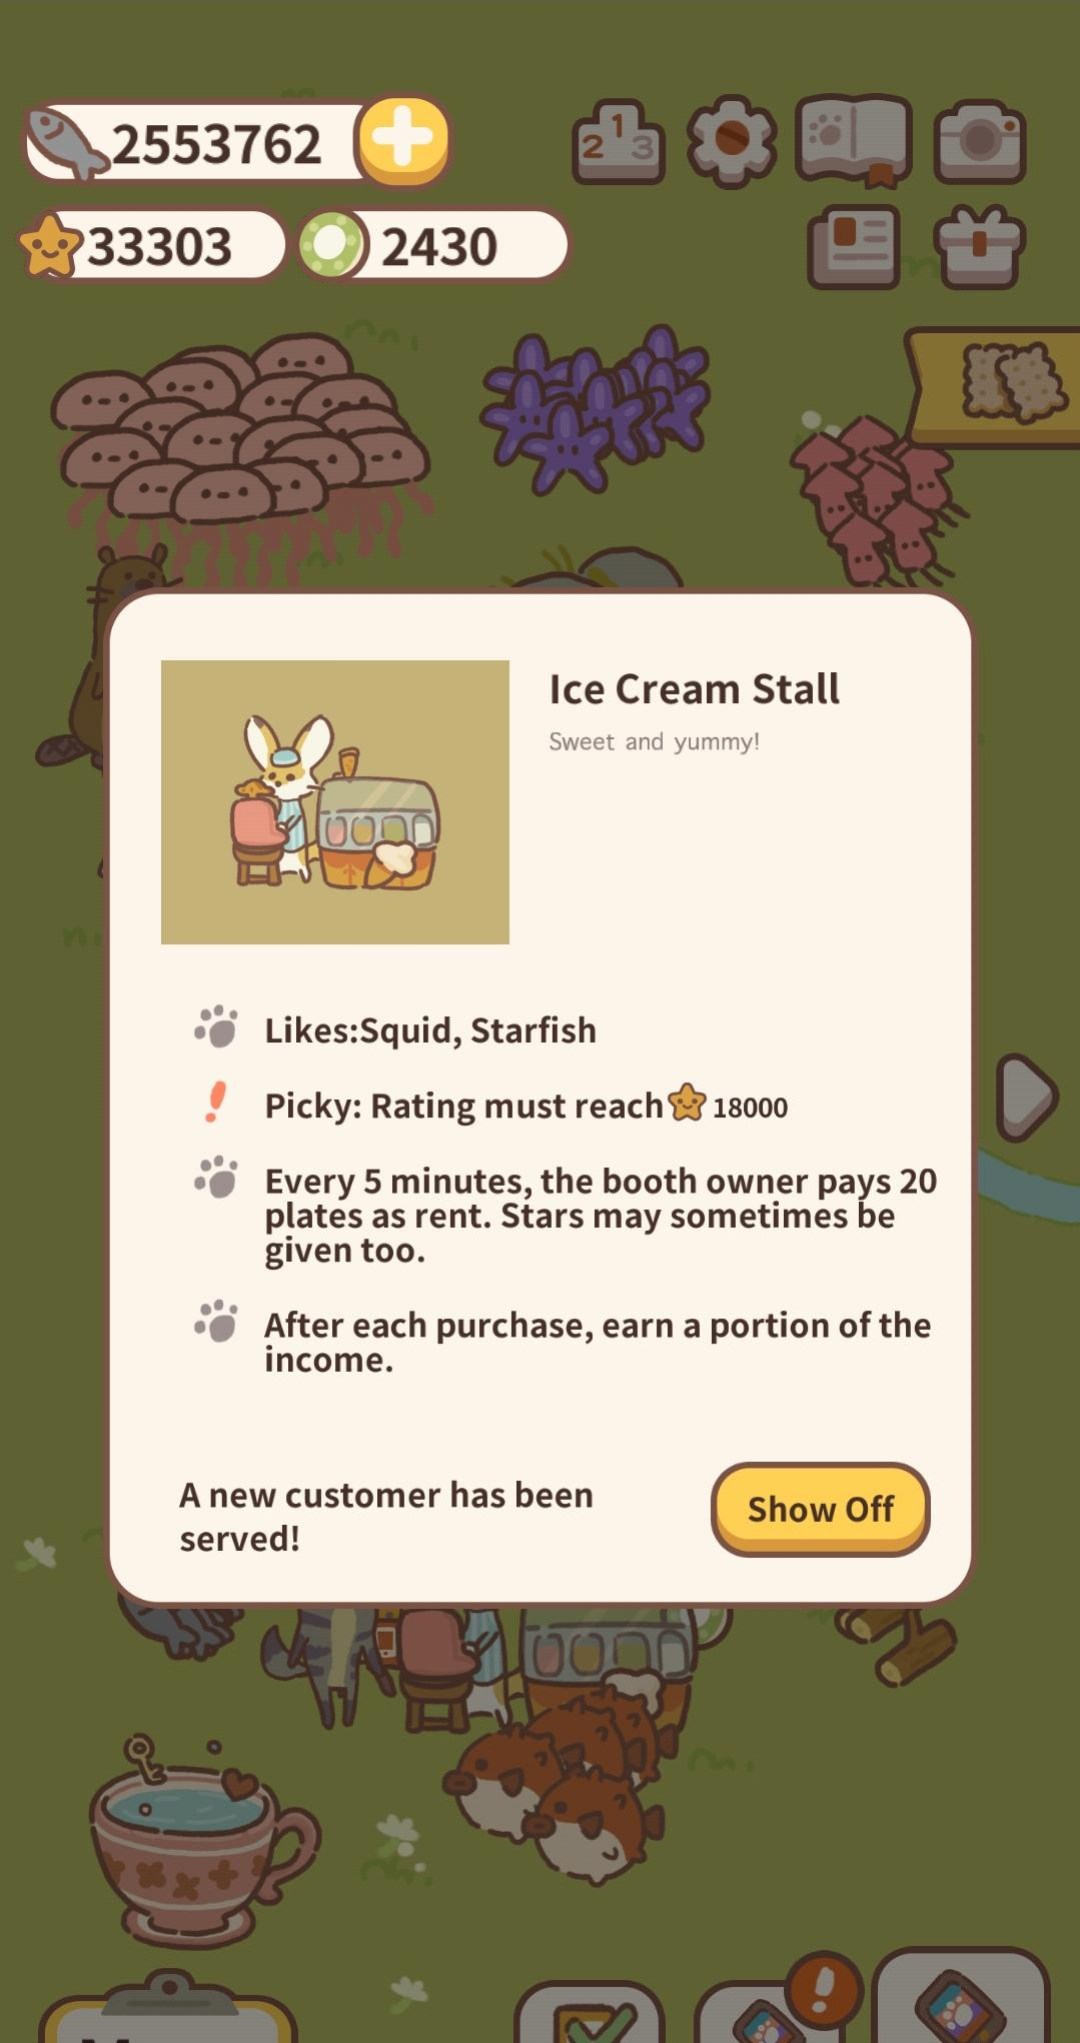 Picture of: Finally! 😄 Ice cream stall booth owner came when I least expect